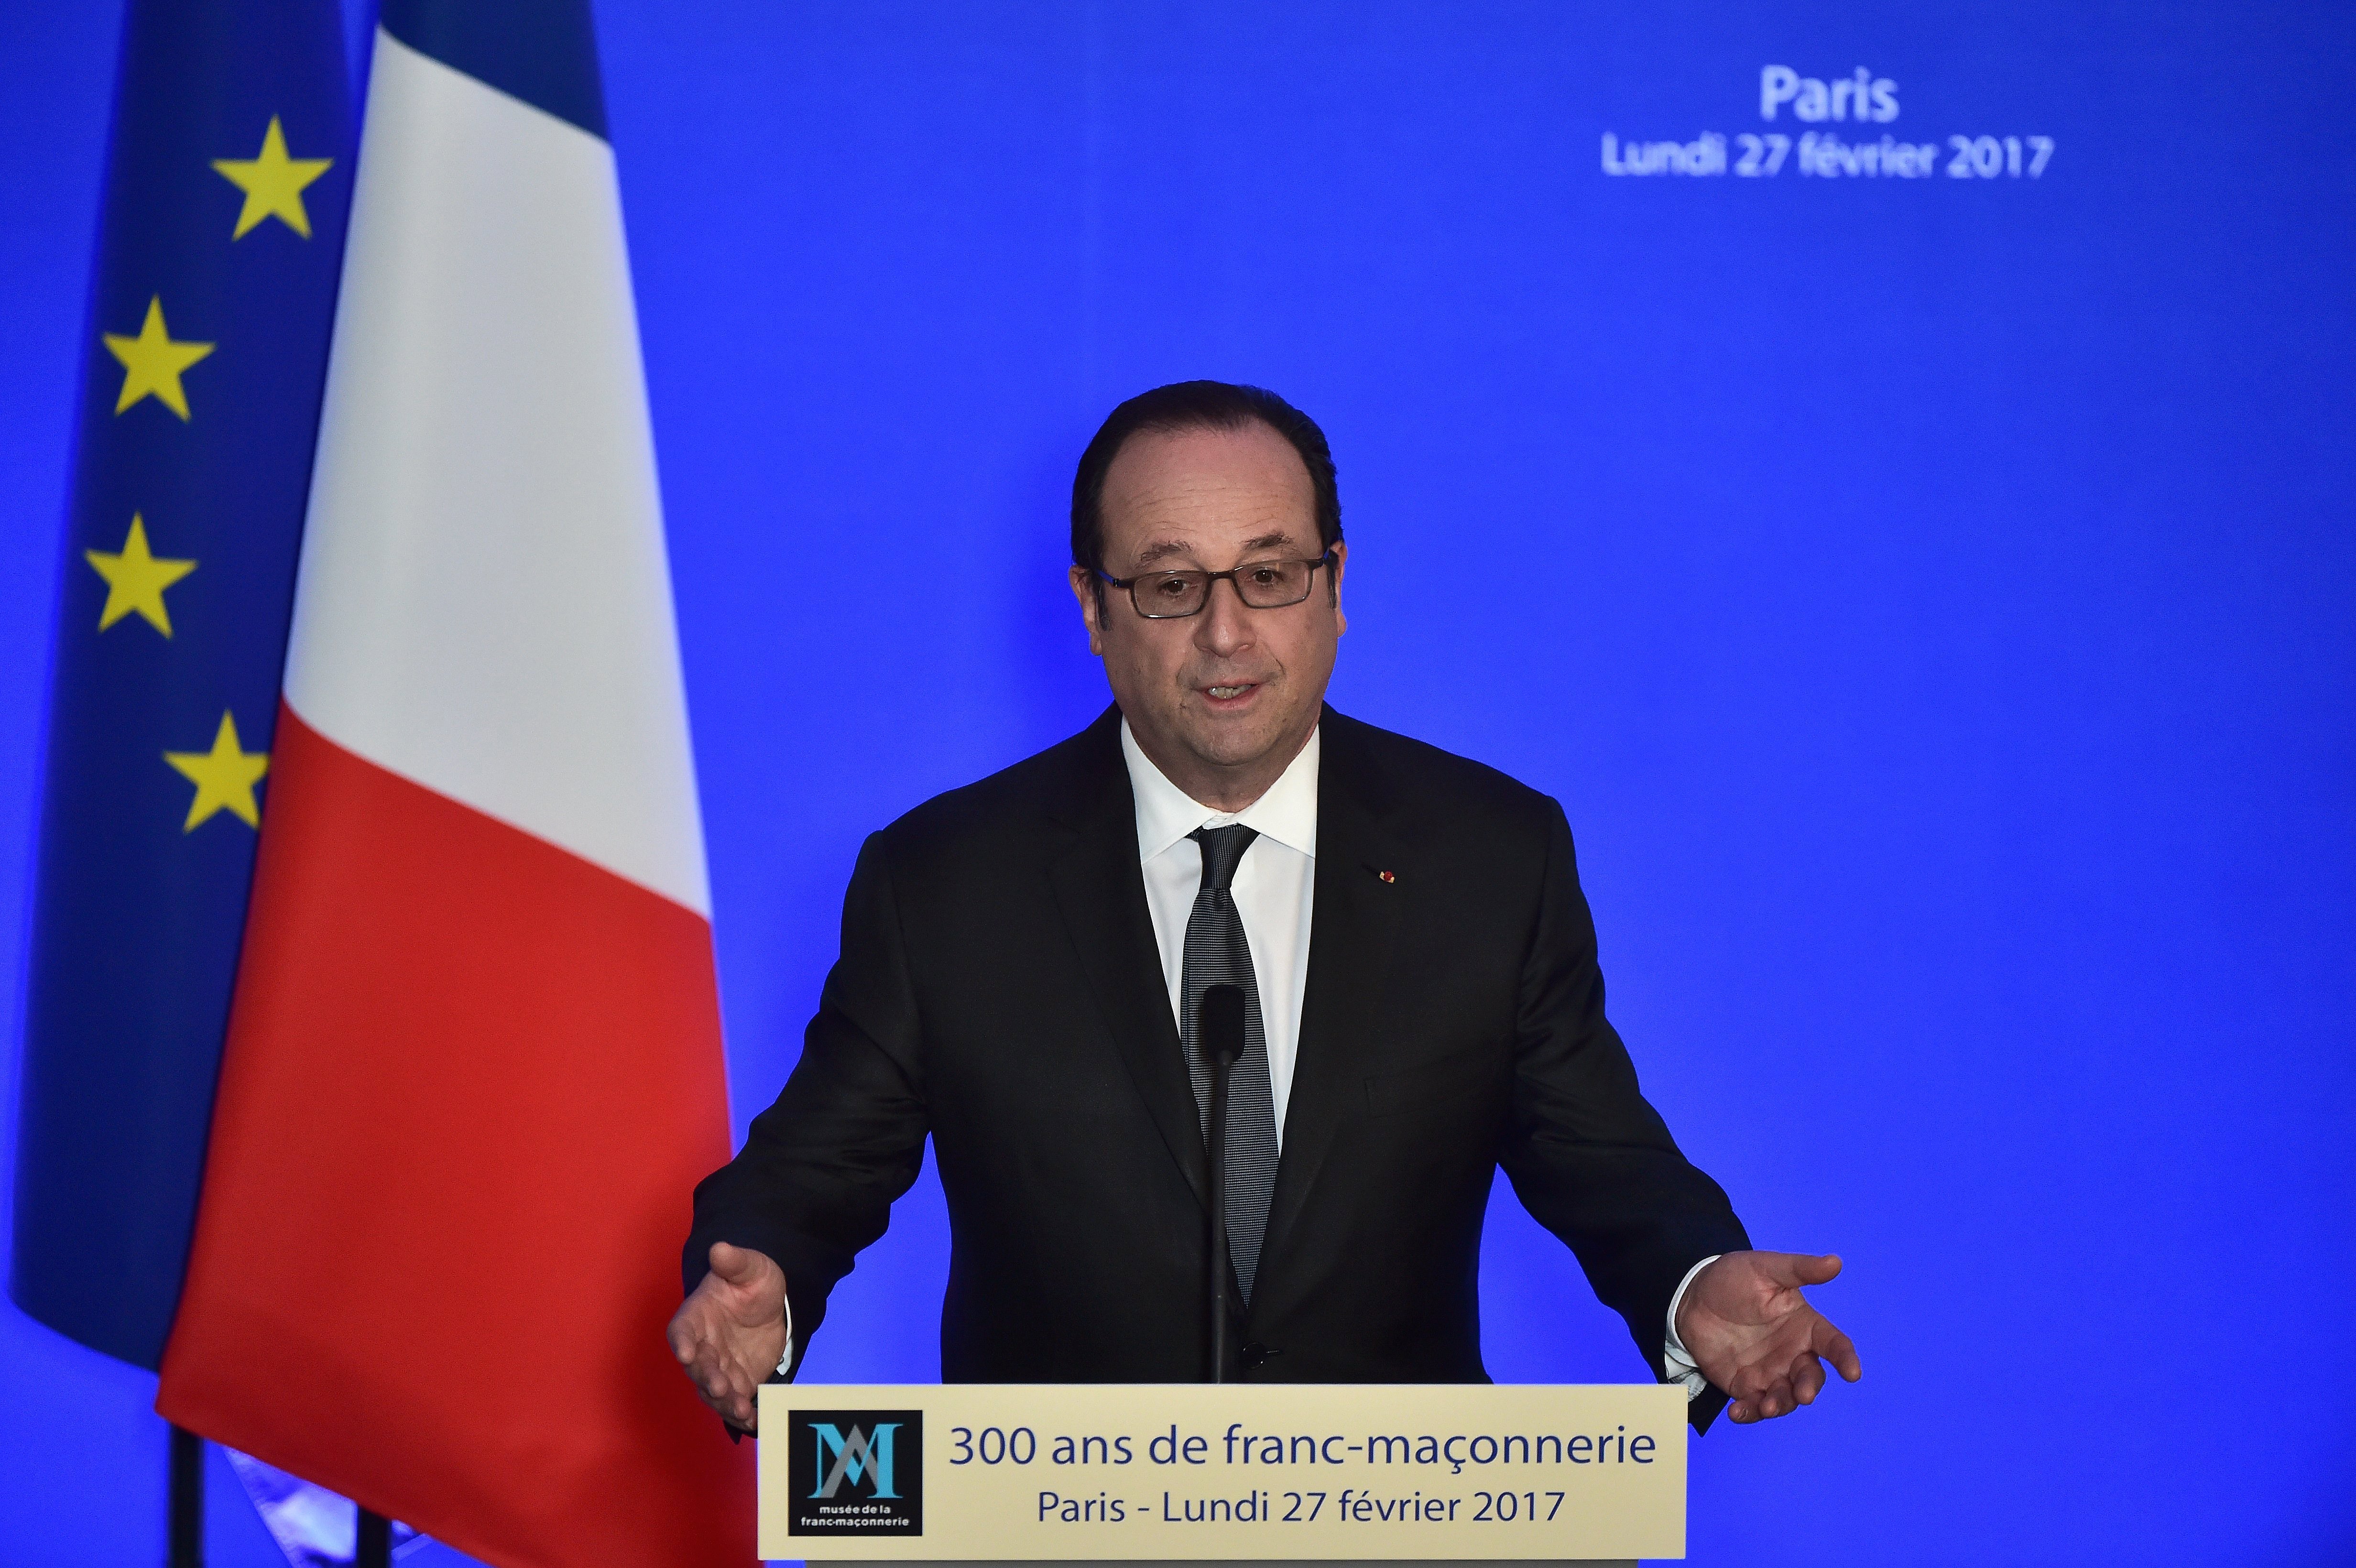 Hollande says Catalan conflict should be resolved "by democratic means"